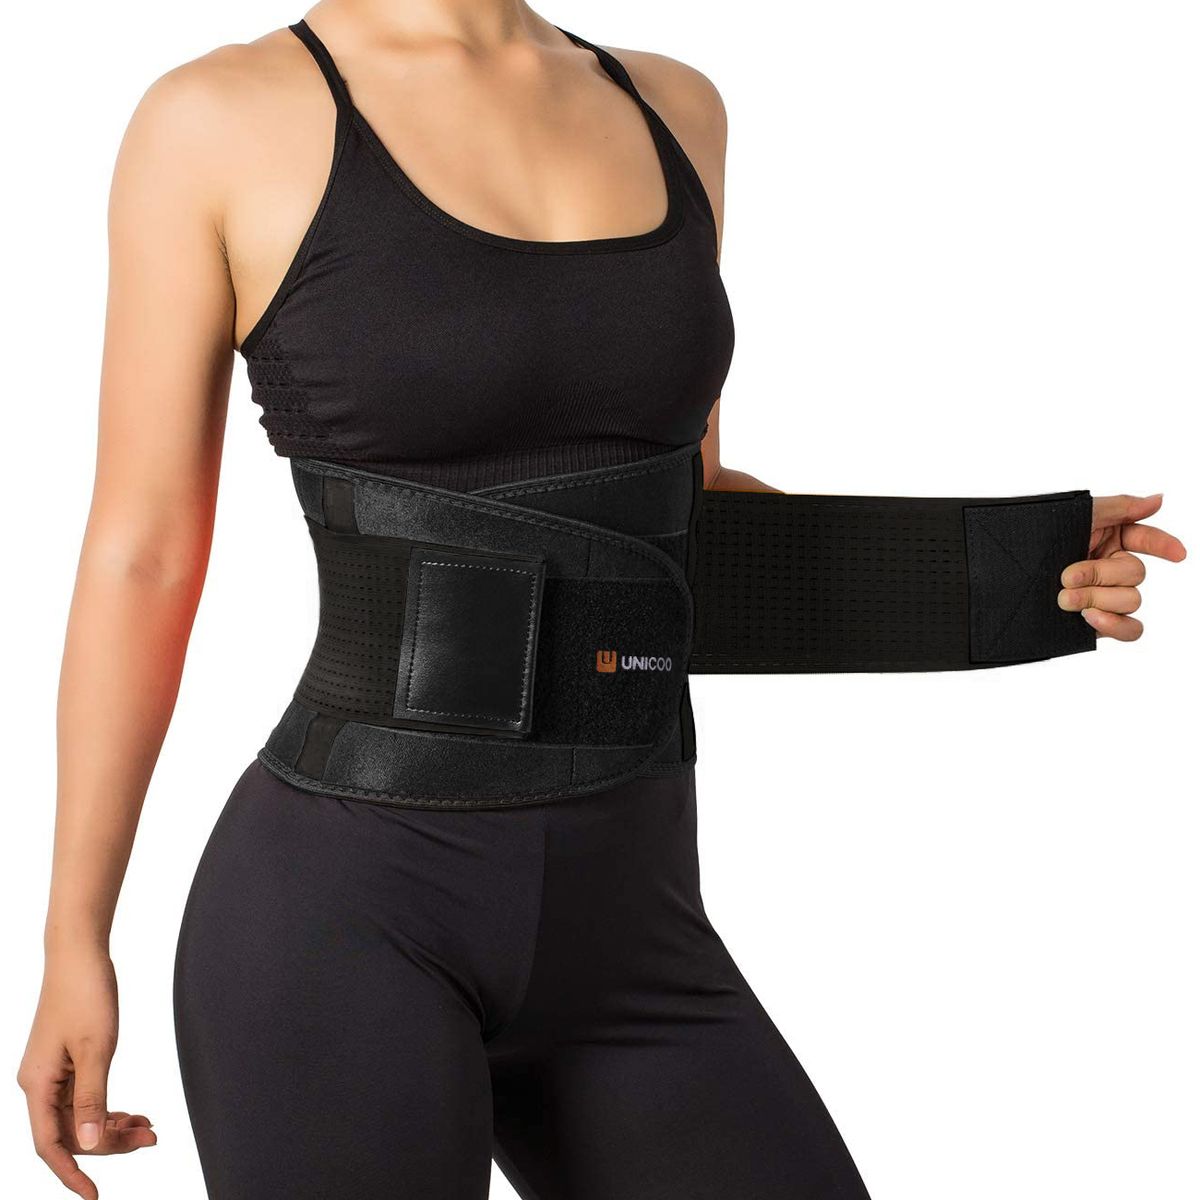 Womens Takealot Slimming Belt For Belly Fat Reduction Body Shaper With  Elastic Waistband For Exercise And Fitness From Daylight, $10.71